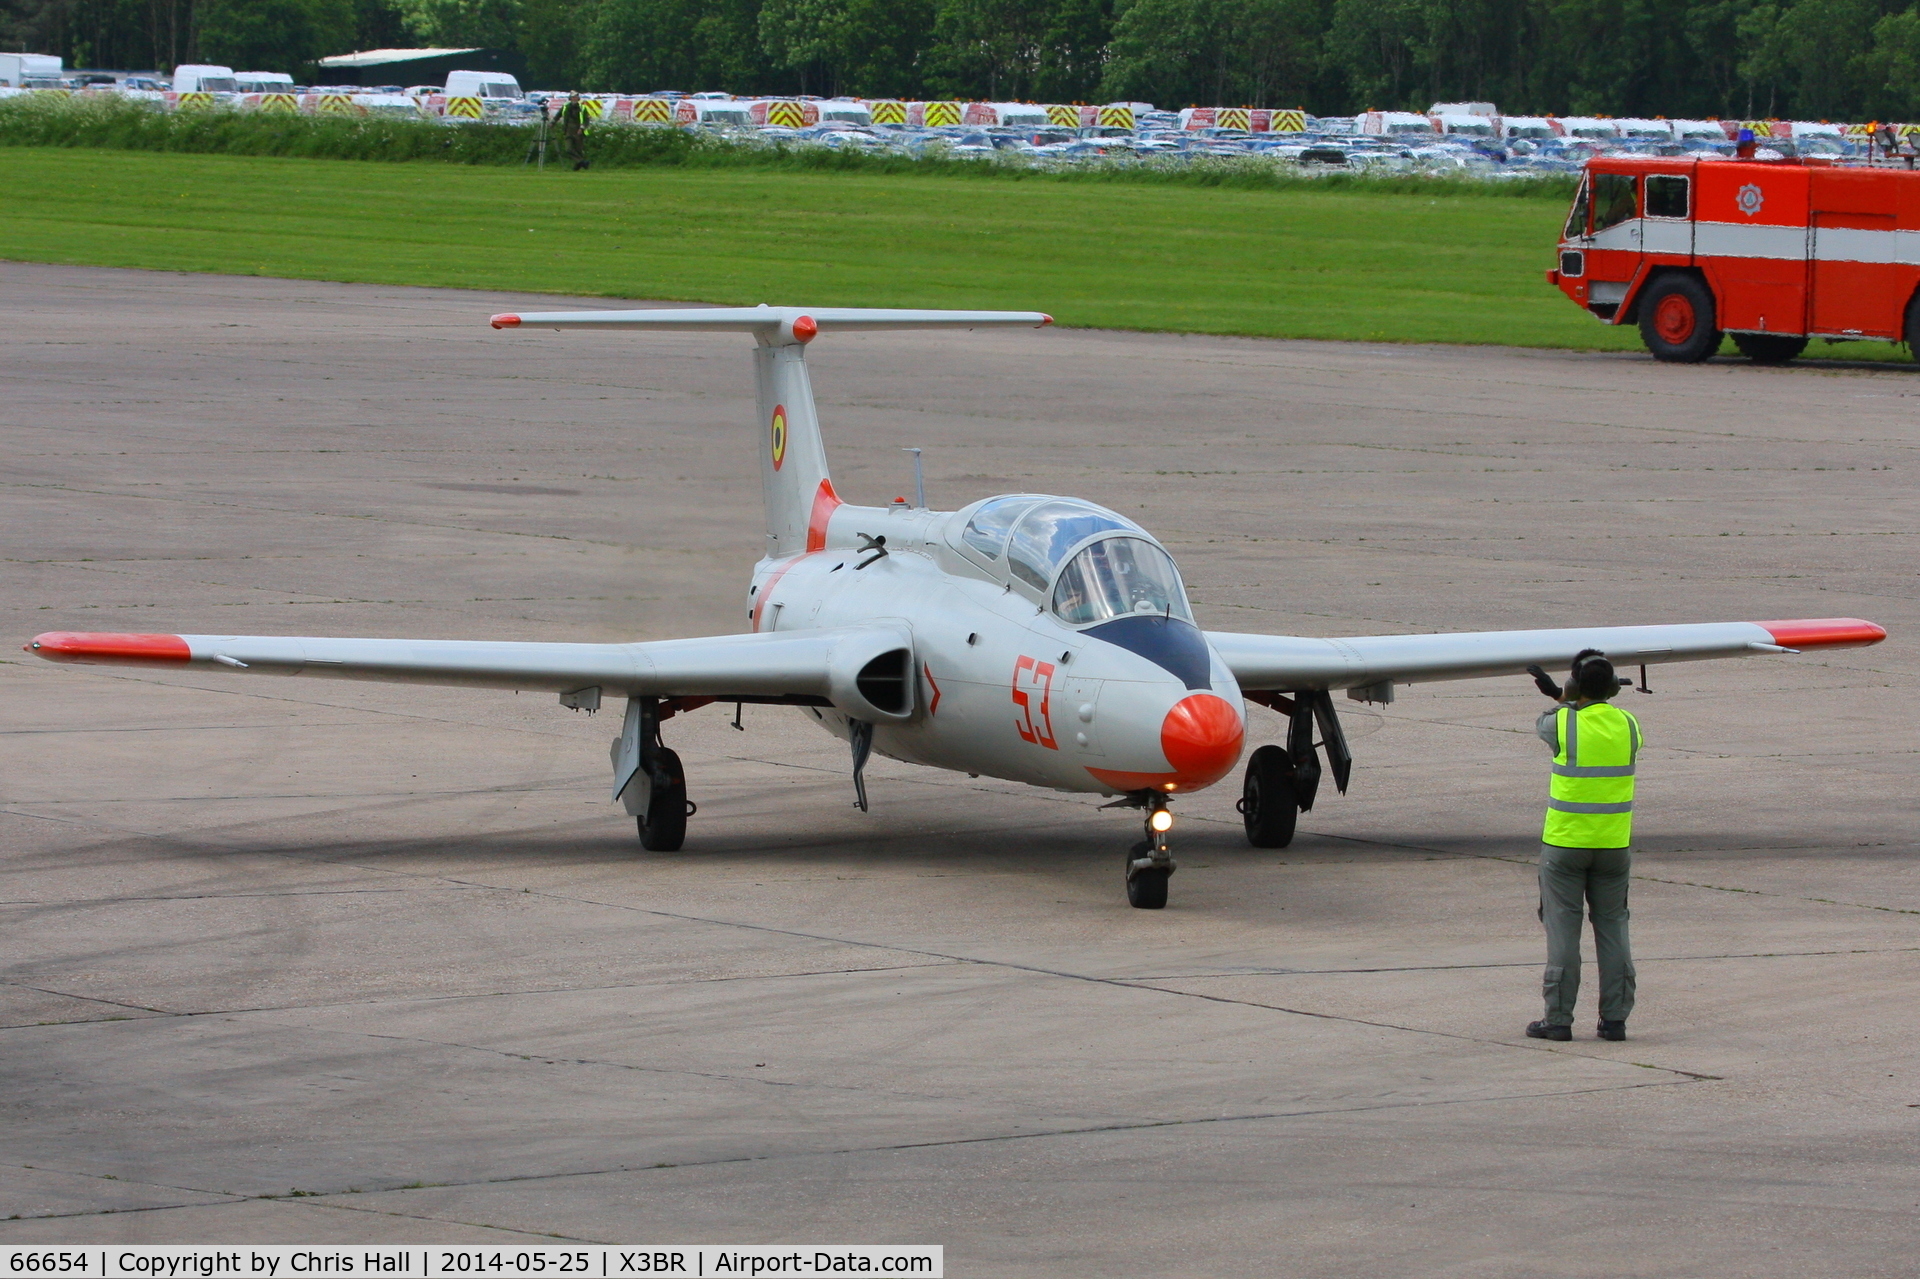 66654, Aero L-29 Delfin C/N 395189, taxying back to the apron after its fast taxy run